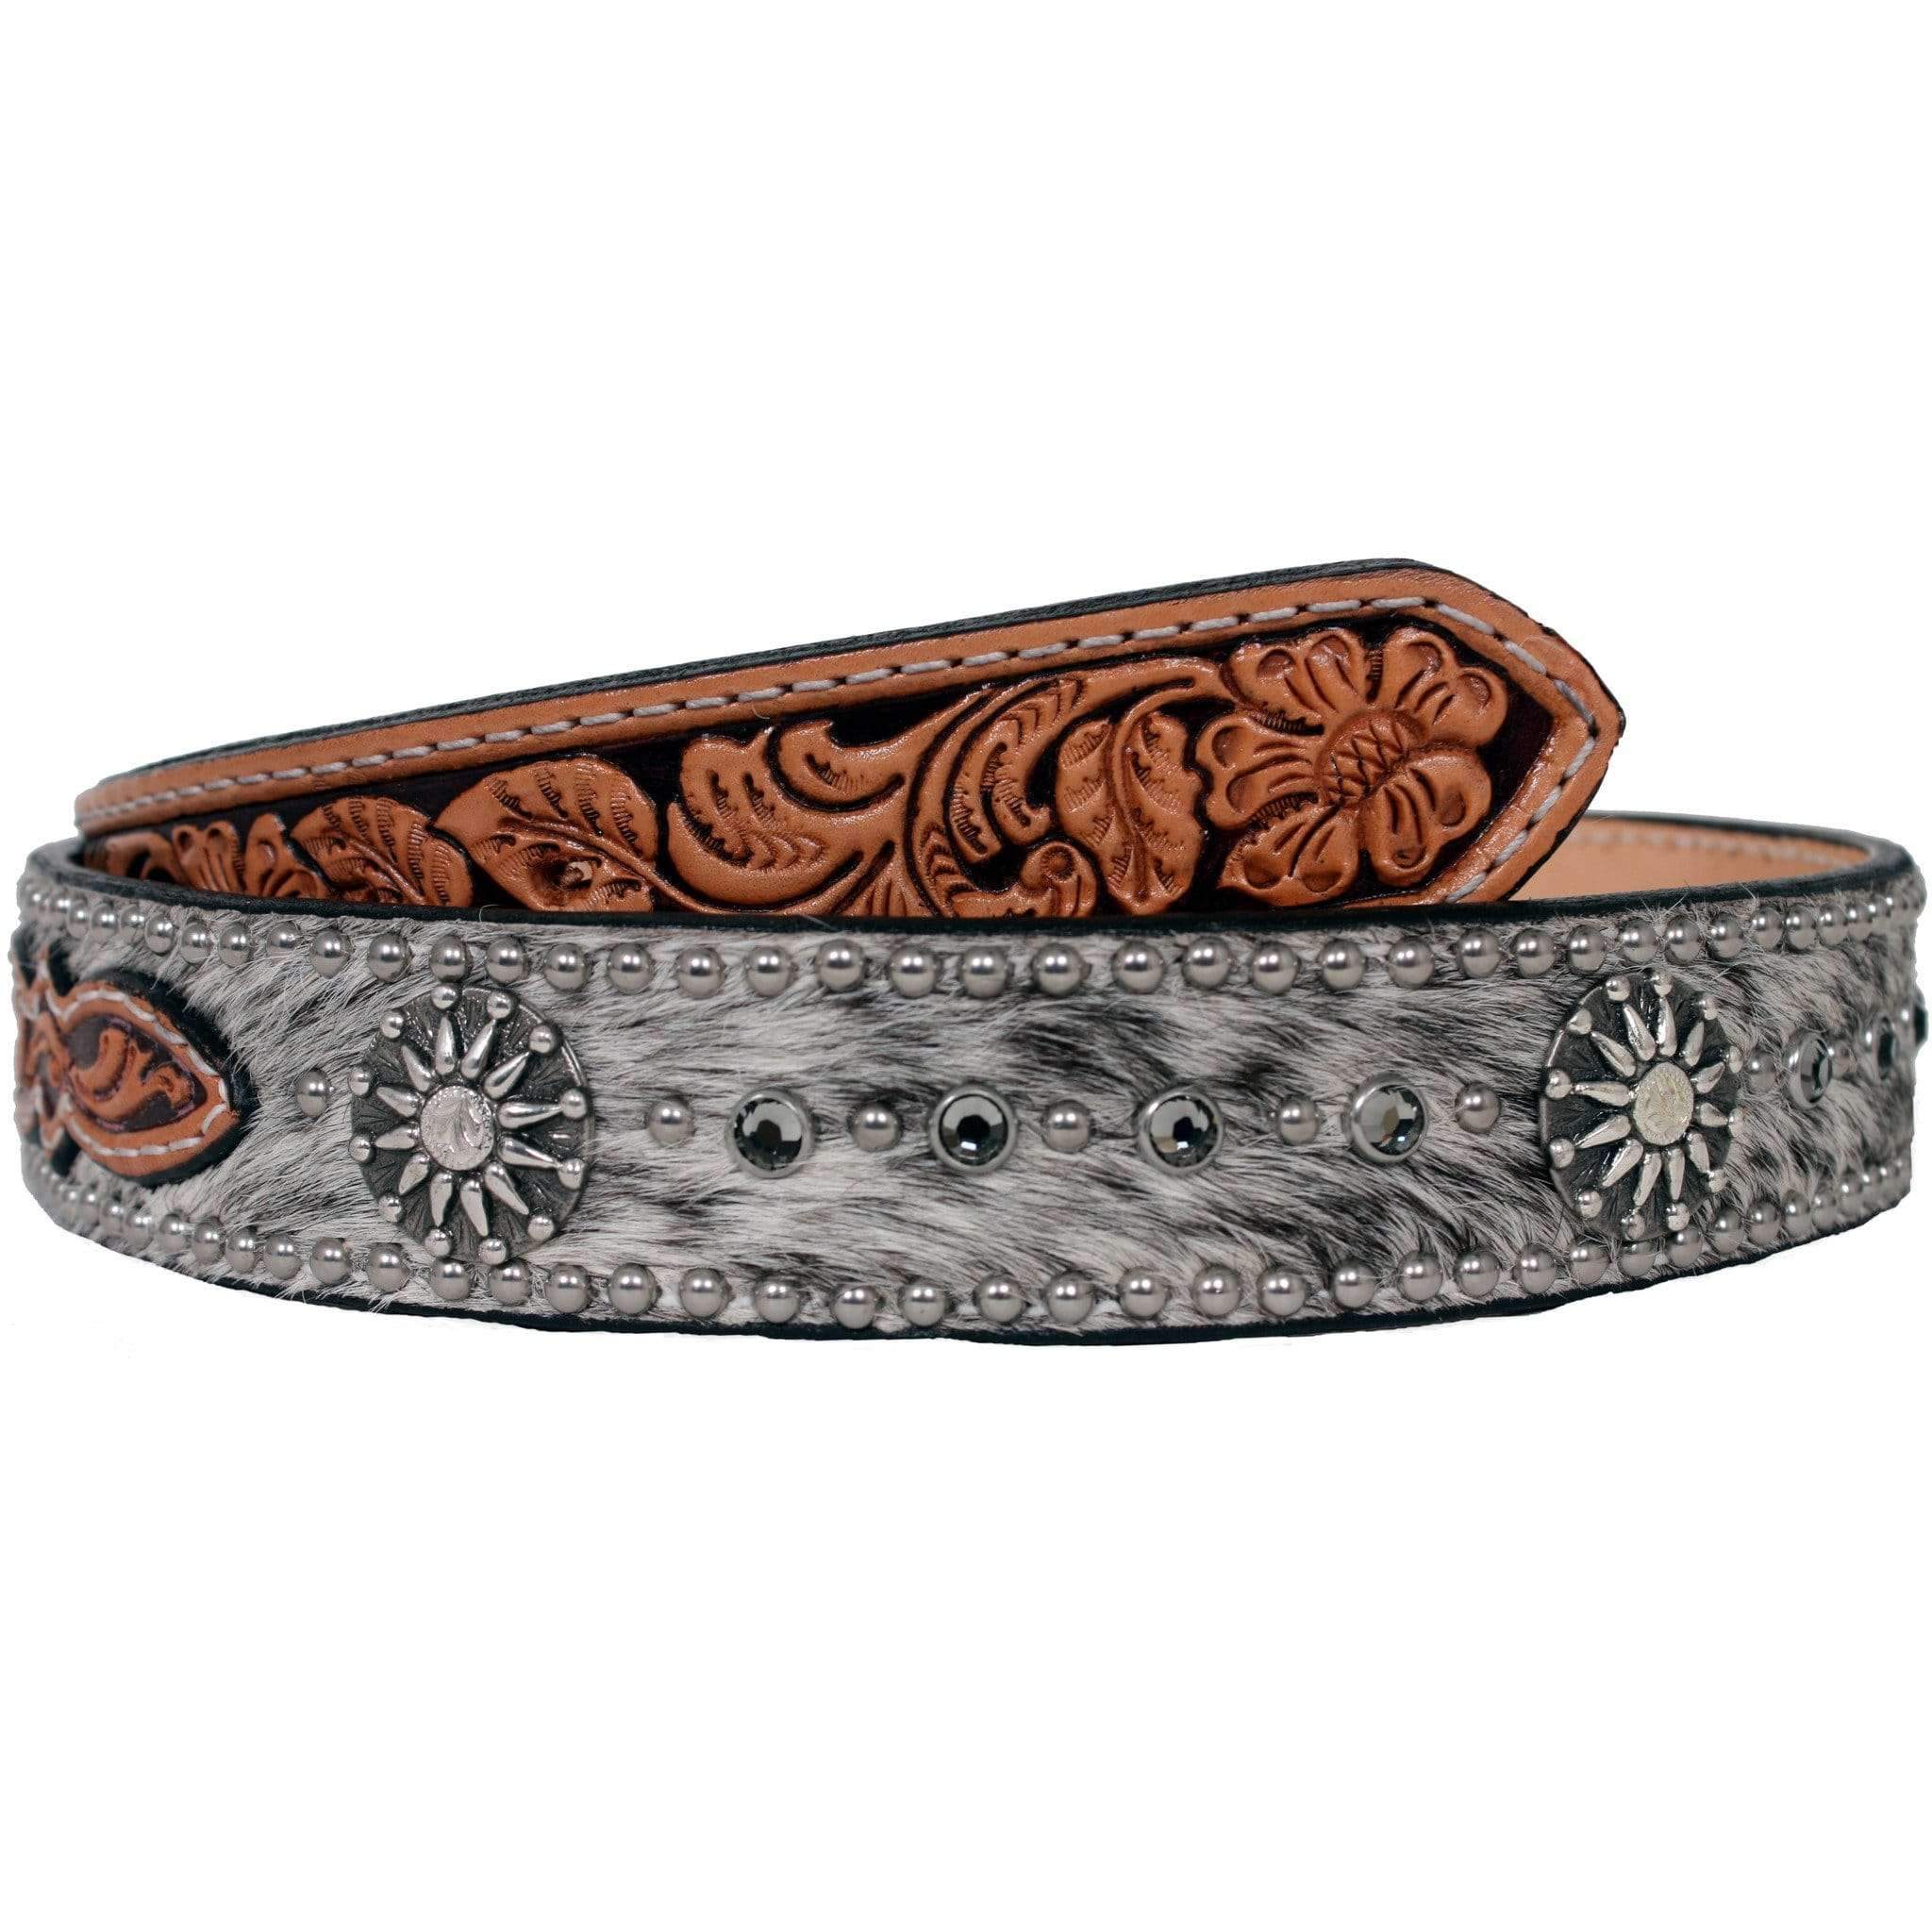 B036 - Black Roan Hair and Floral Tooled Belt - Double J Saddlery